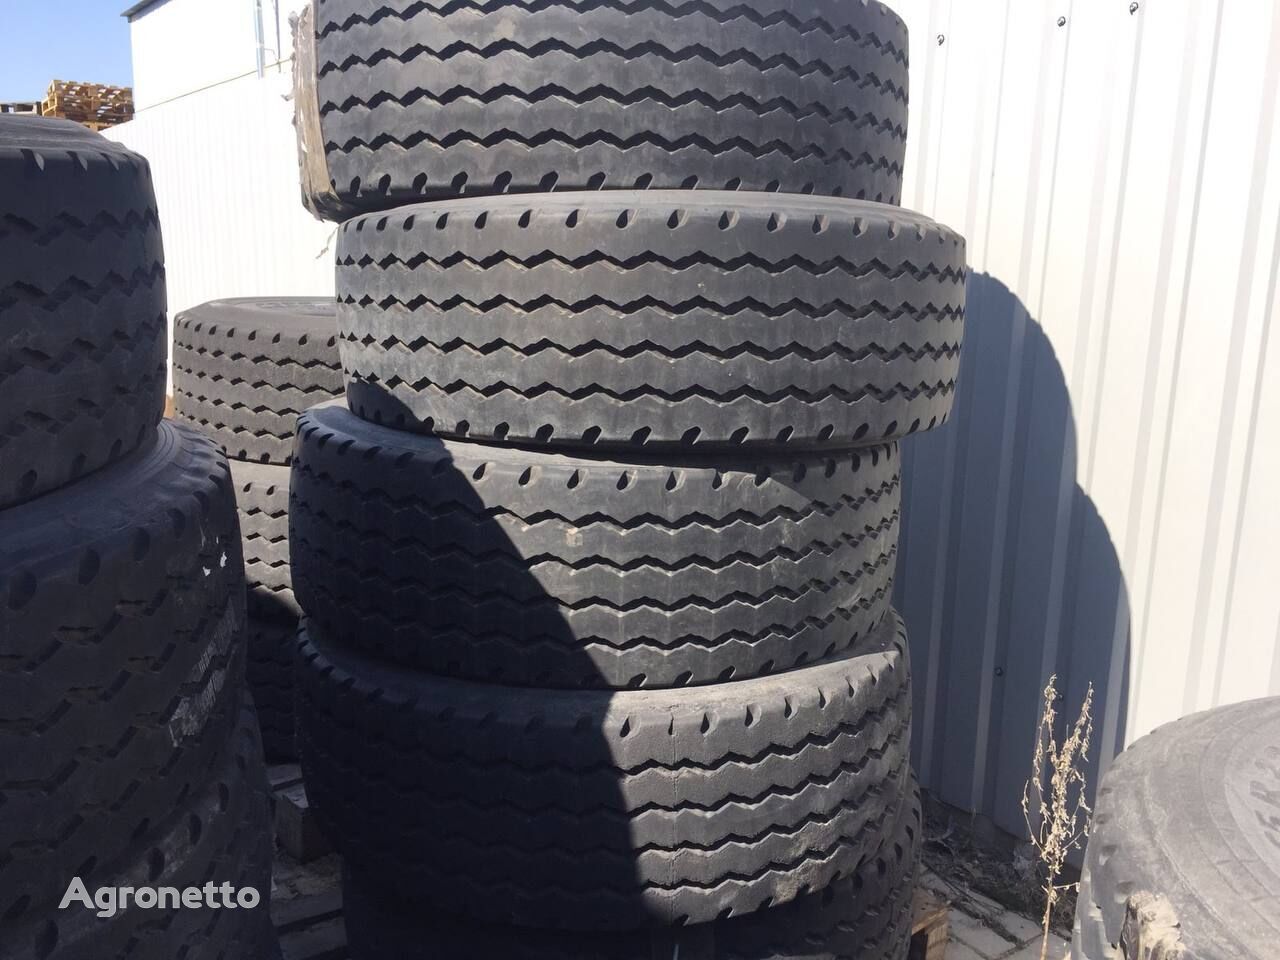 new Goodyear G296 MSA 425/65 R22.5 dlya ecolo-tiger tire for trailer agricultural machinery